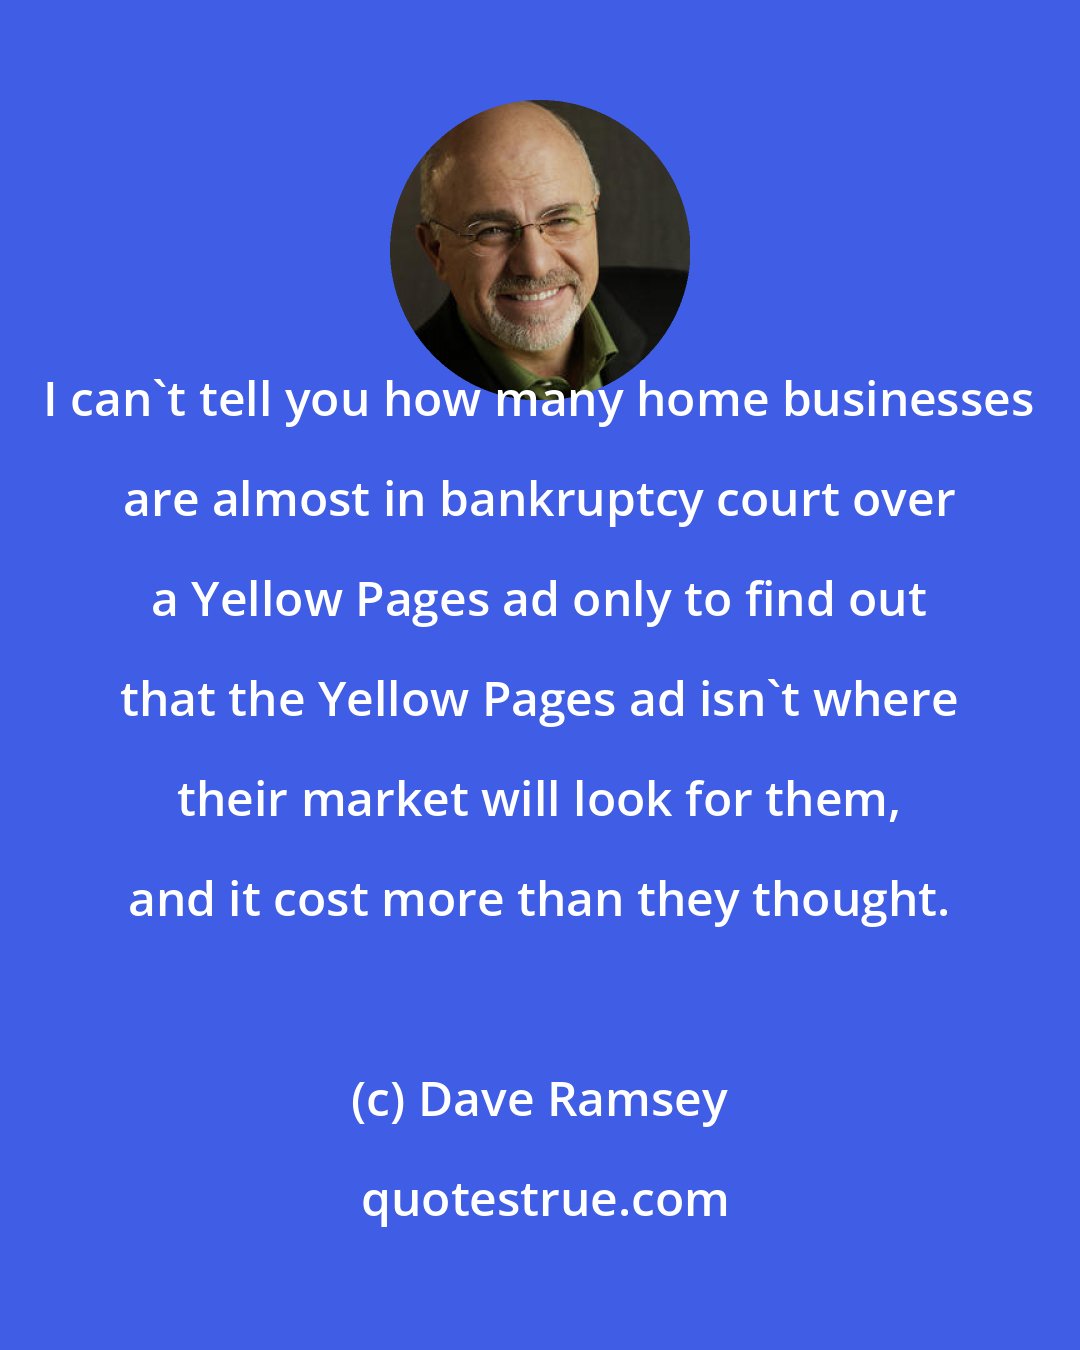 Dave Ramsey: I can't tell you how many home businesses are almost in bankruptcy court over a Yellow Pages ad only to find out that the Yellow Pages ad isn't where their market will look for them, and it cost more than they thought.